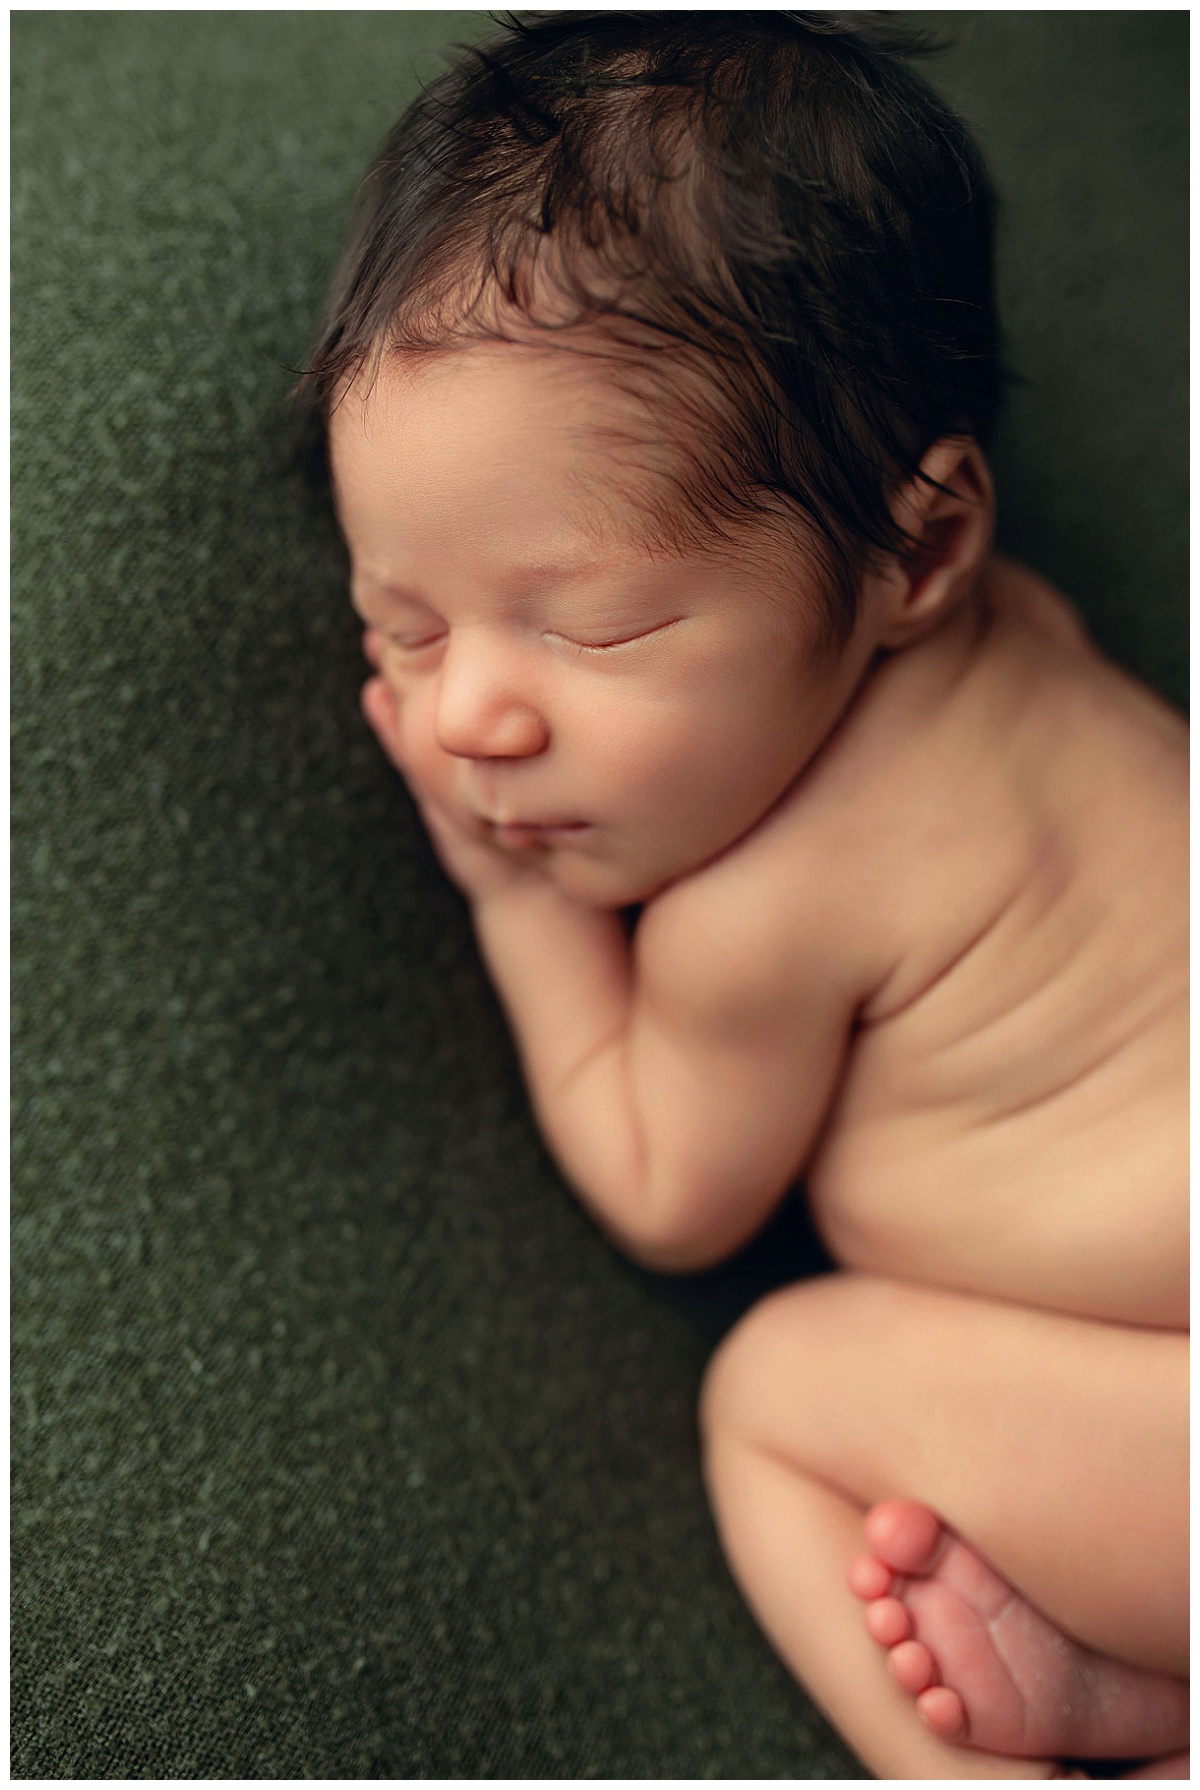 tiny features are highlighted as infant sleeps by Charlottesville photographer